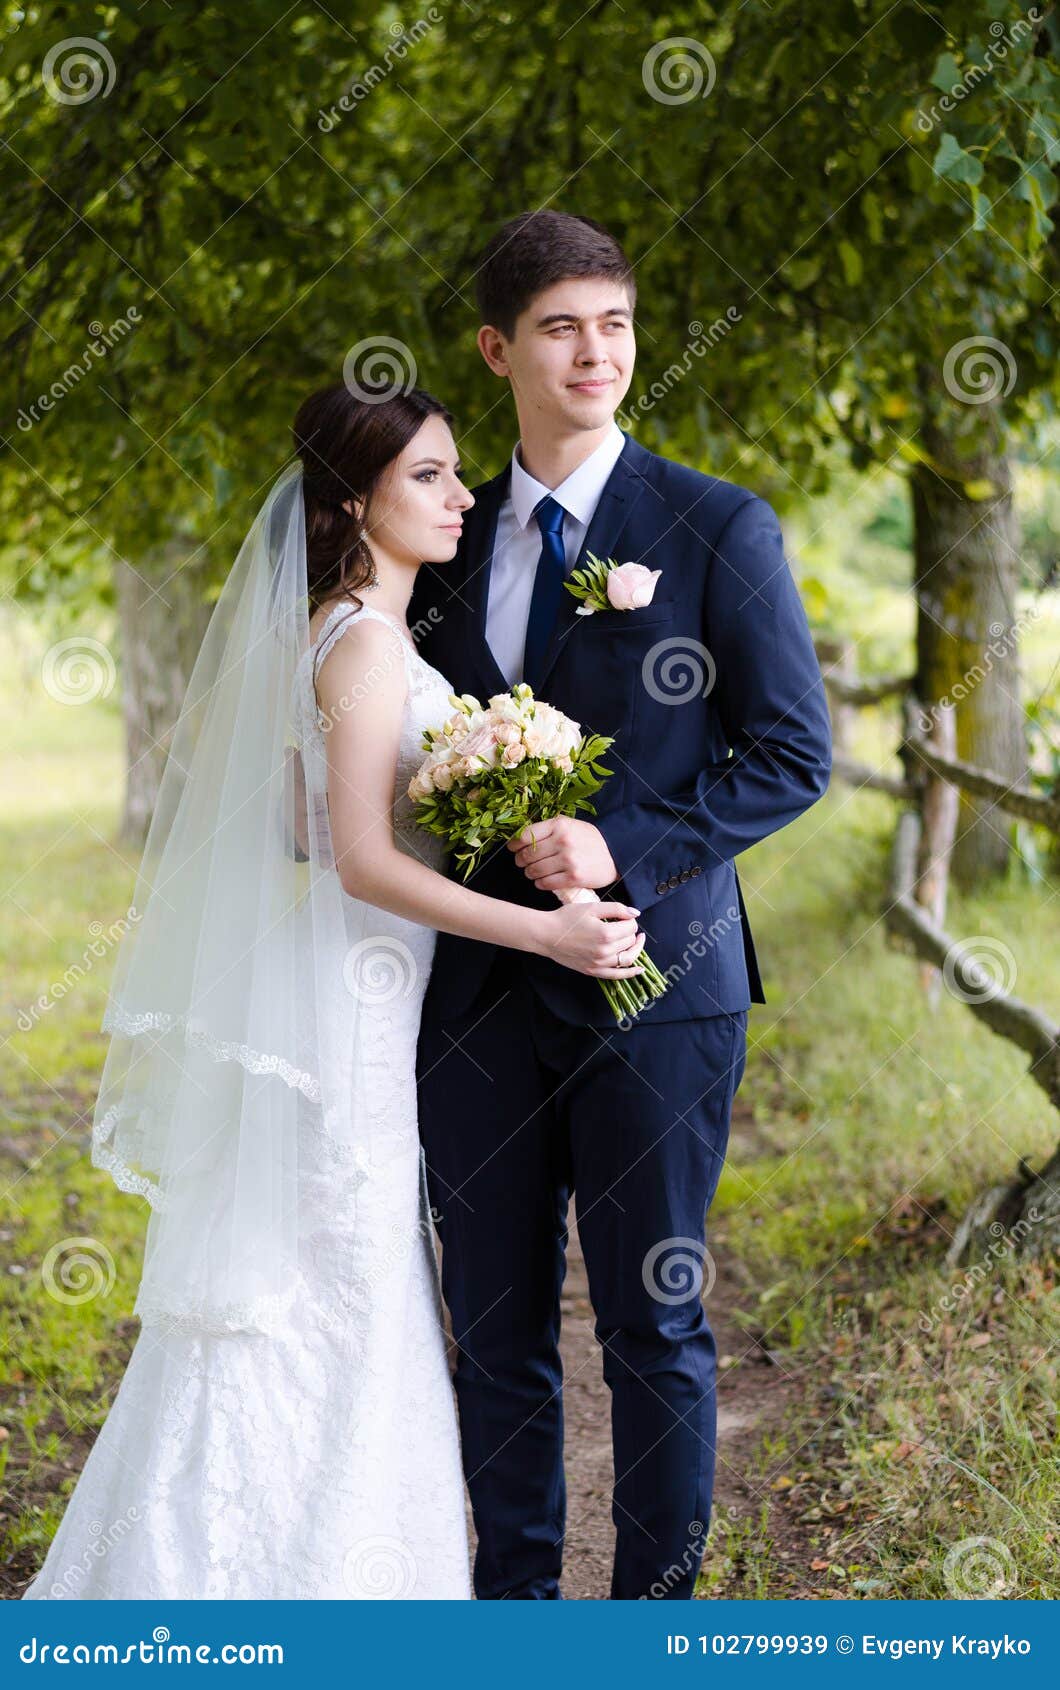 A Beautiful Married Couple in Wedding Dresses, Posing for a Photo Shooting  in an Belarusian Village Near the Fence, with a Wedding Stock Image - Image  of female, bride: 102799939